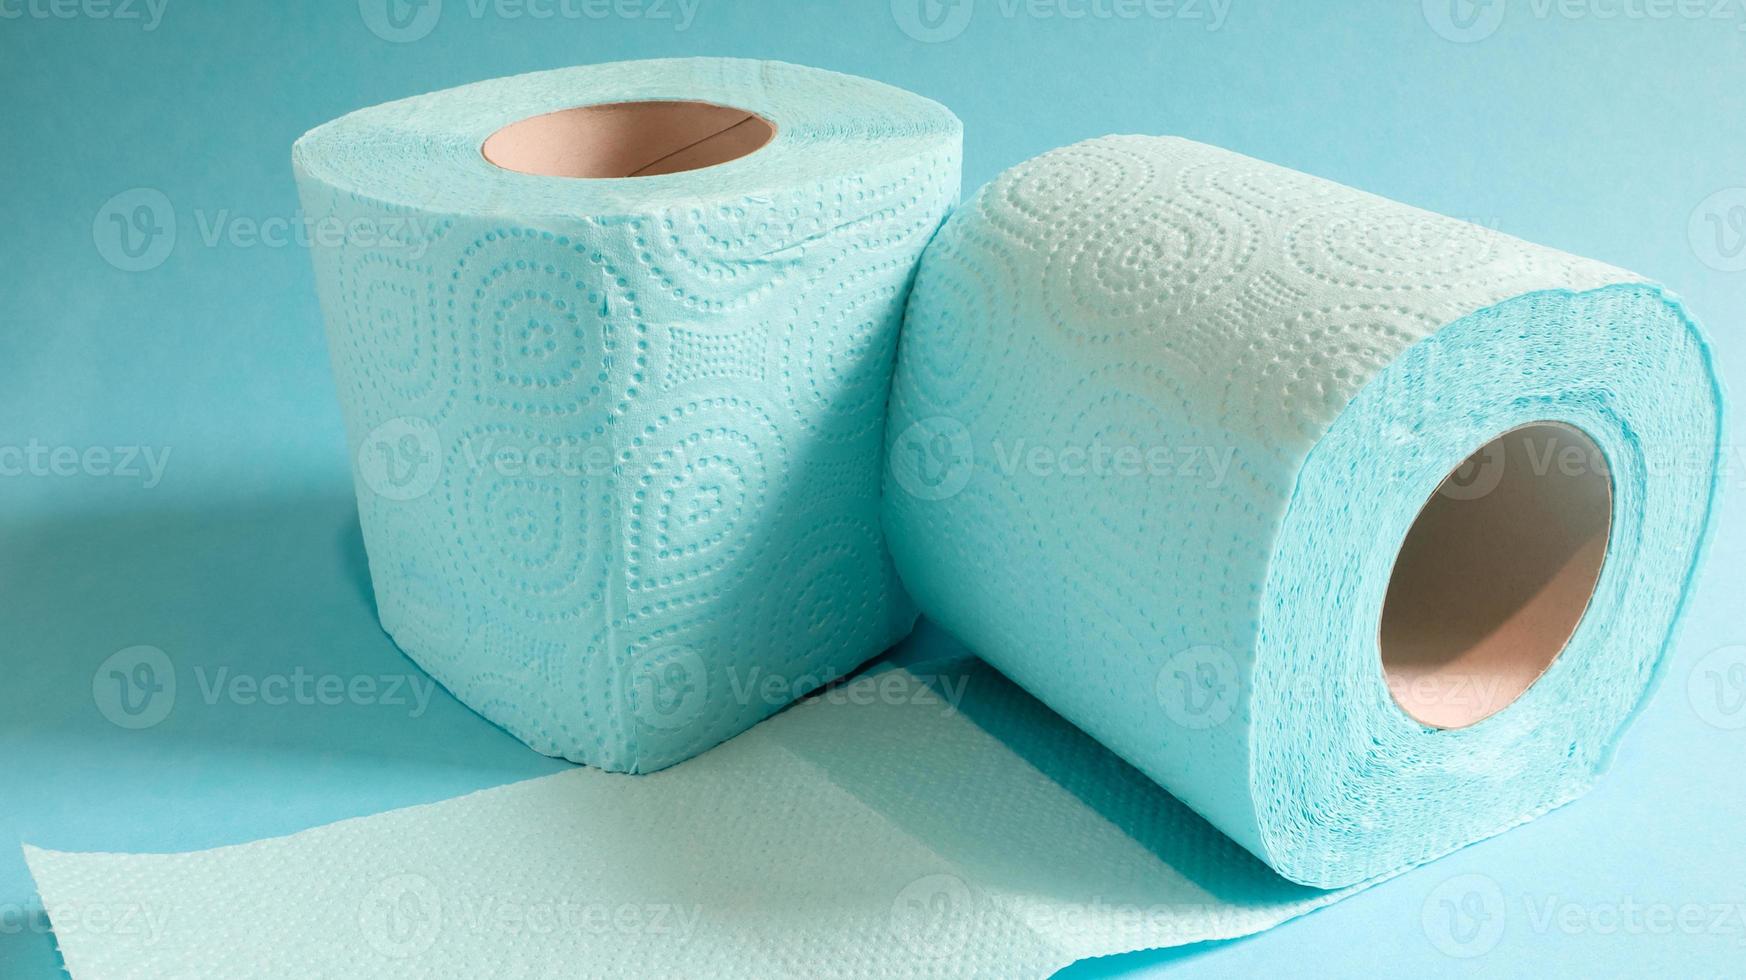 Blue roll of modern toilet paper on a blue background. A paper product on a cardboard sleeve, used for sanitary purposes from cellulose with cutouts for easy tearing. Embossed drawing photo